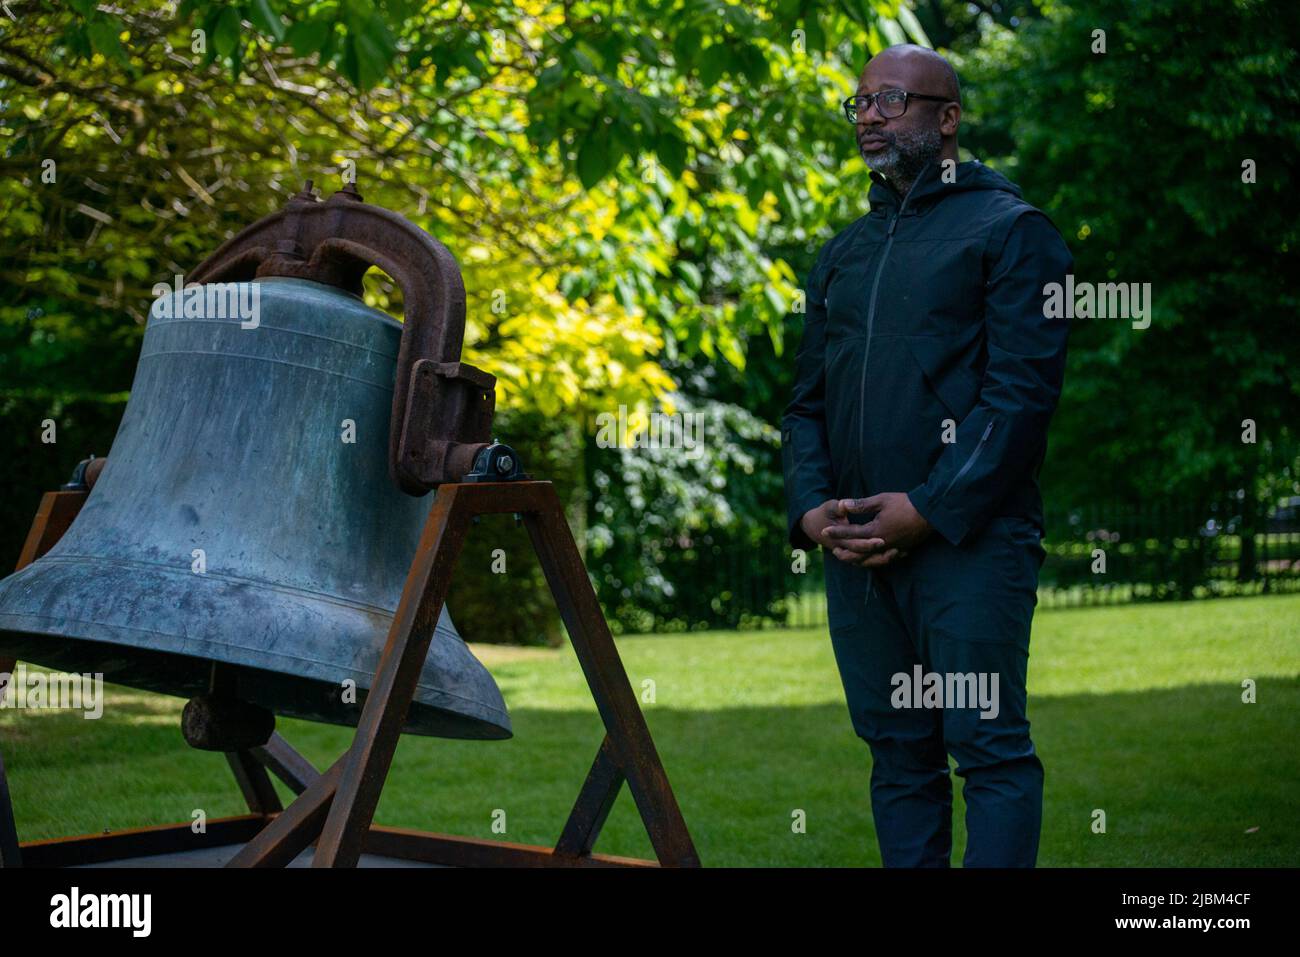 Theaster Gates at the opening of his Serpentine Pavilion 2022 Stock Photo